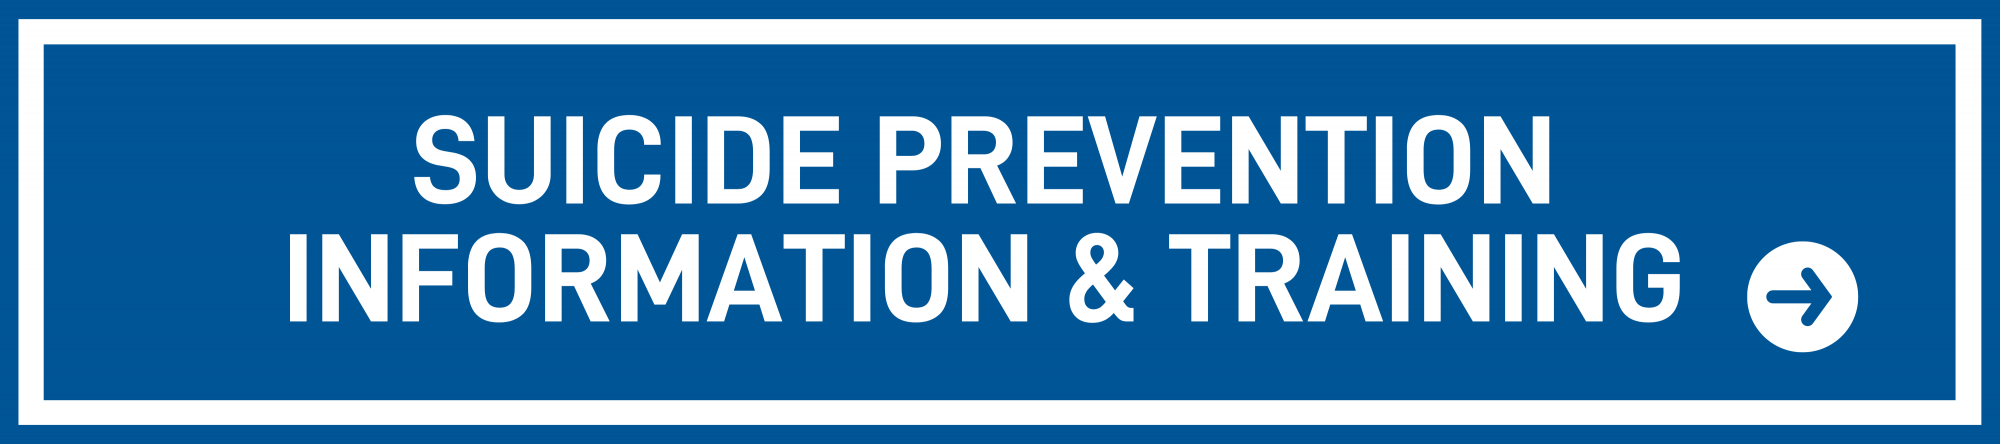 Blue box with white text that says "Suicide prevention information and training"